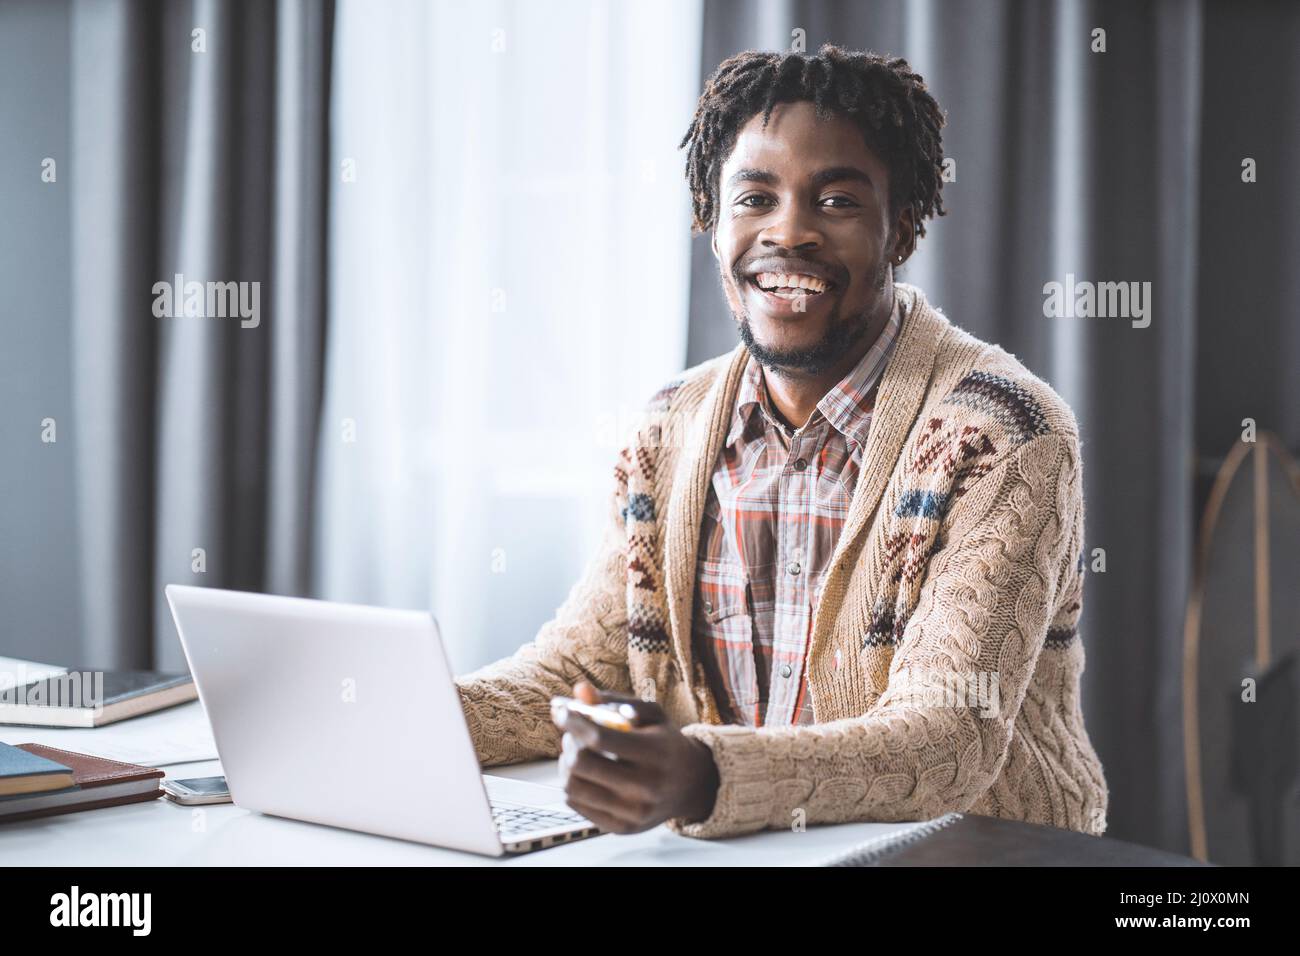 African man working from home using laptop sitting next to the window. Young entrepreneur working on his laptop at home. African Stock Photo